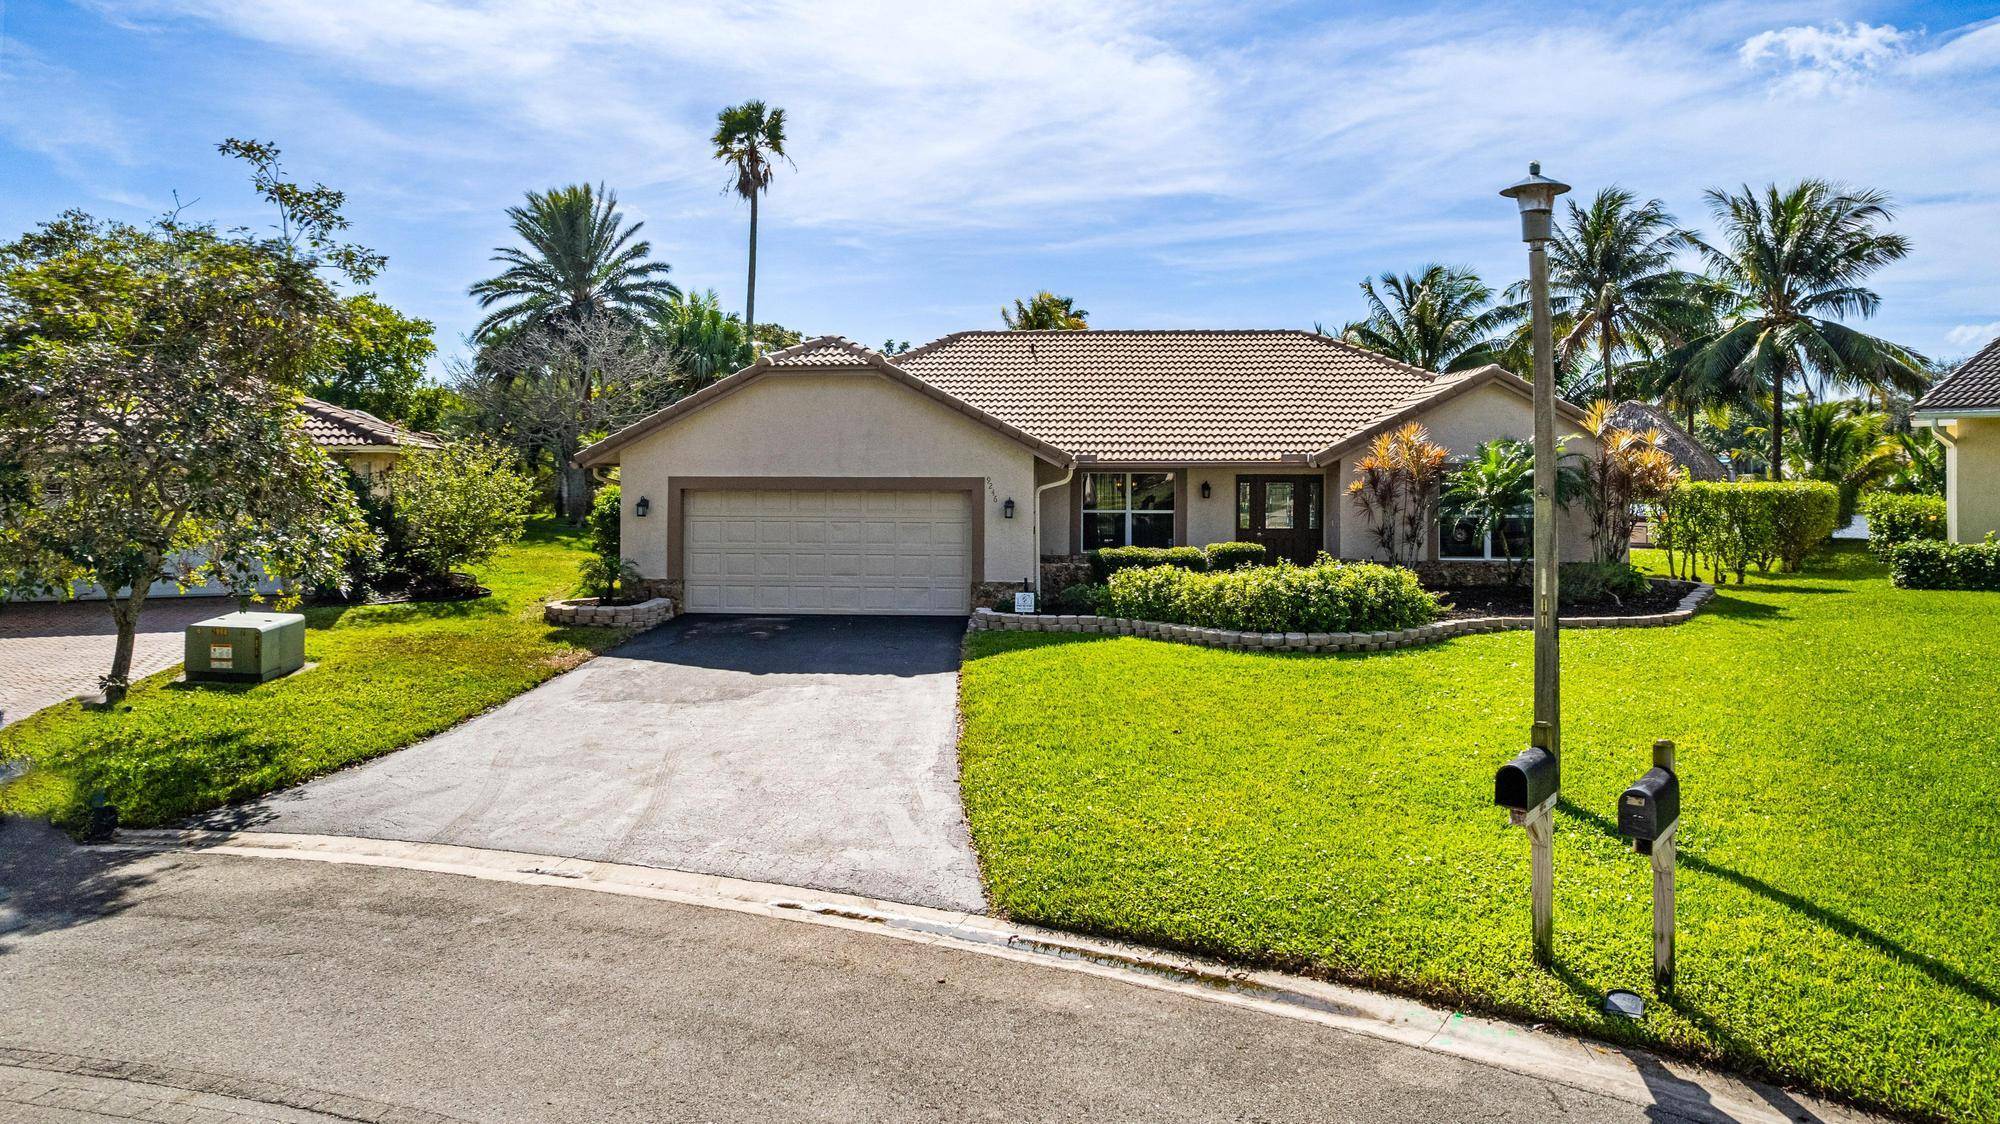 Rarely available waterfront home in Coral Springs.